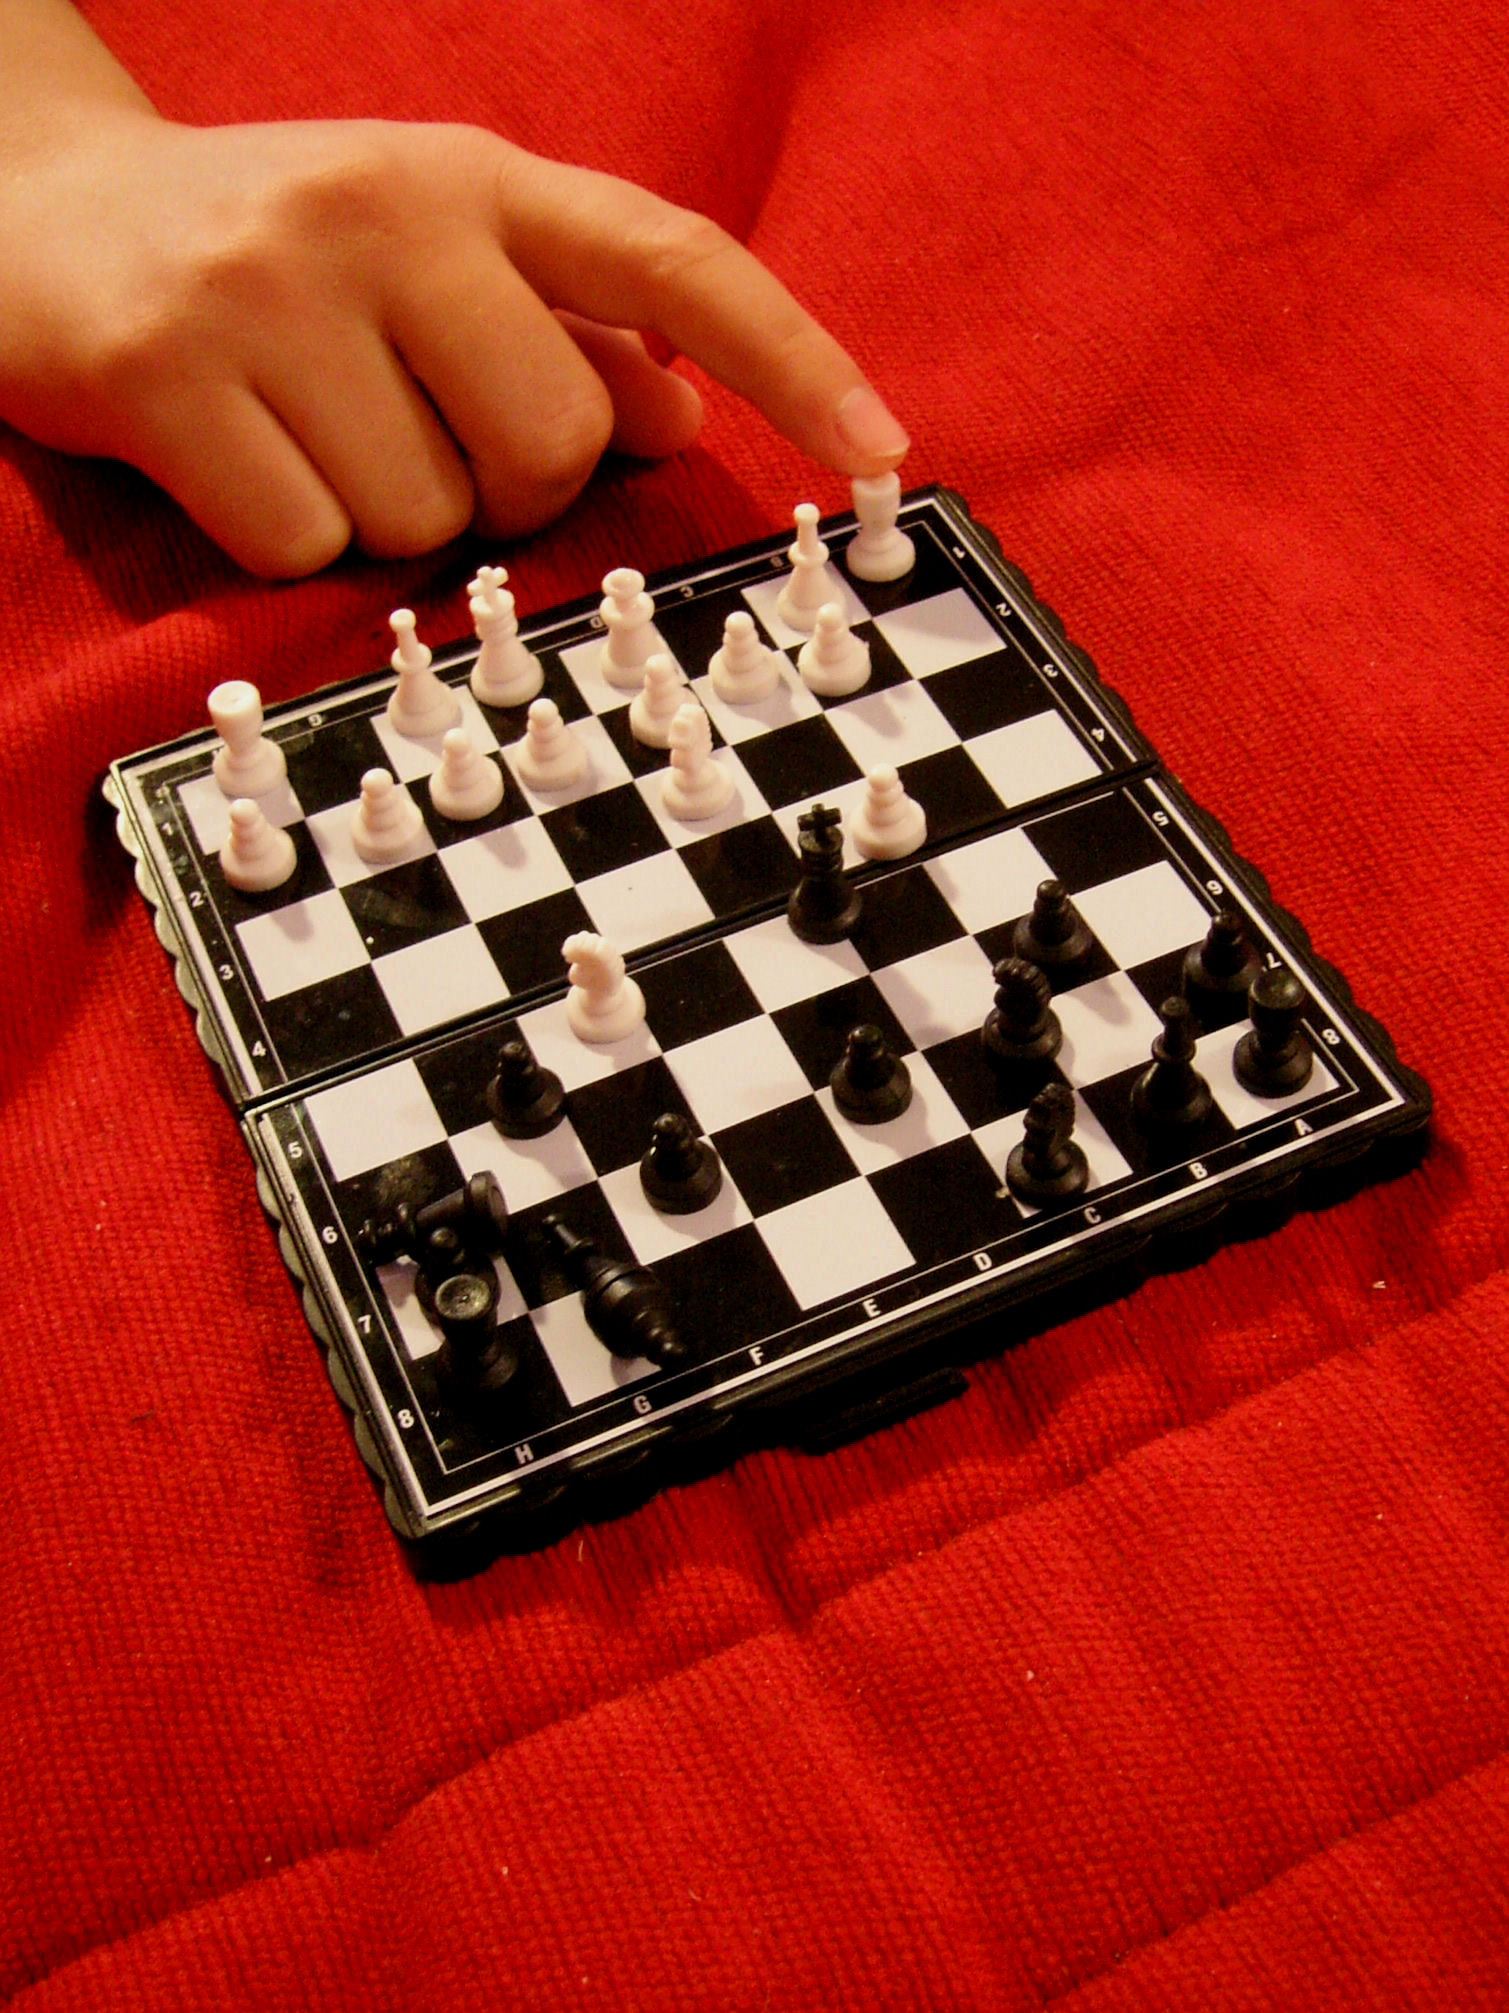 a hand moves a chess board with black pieces